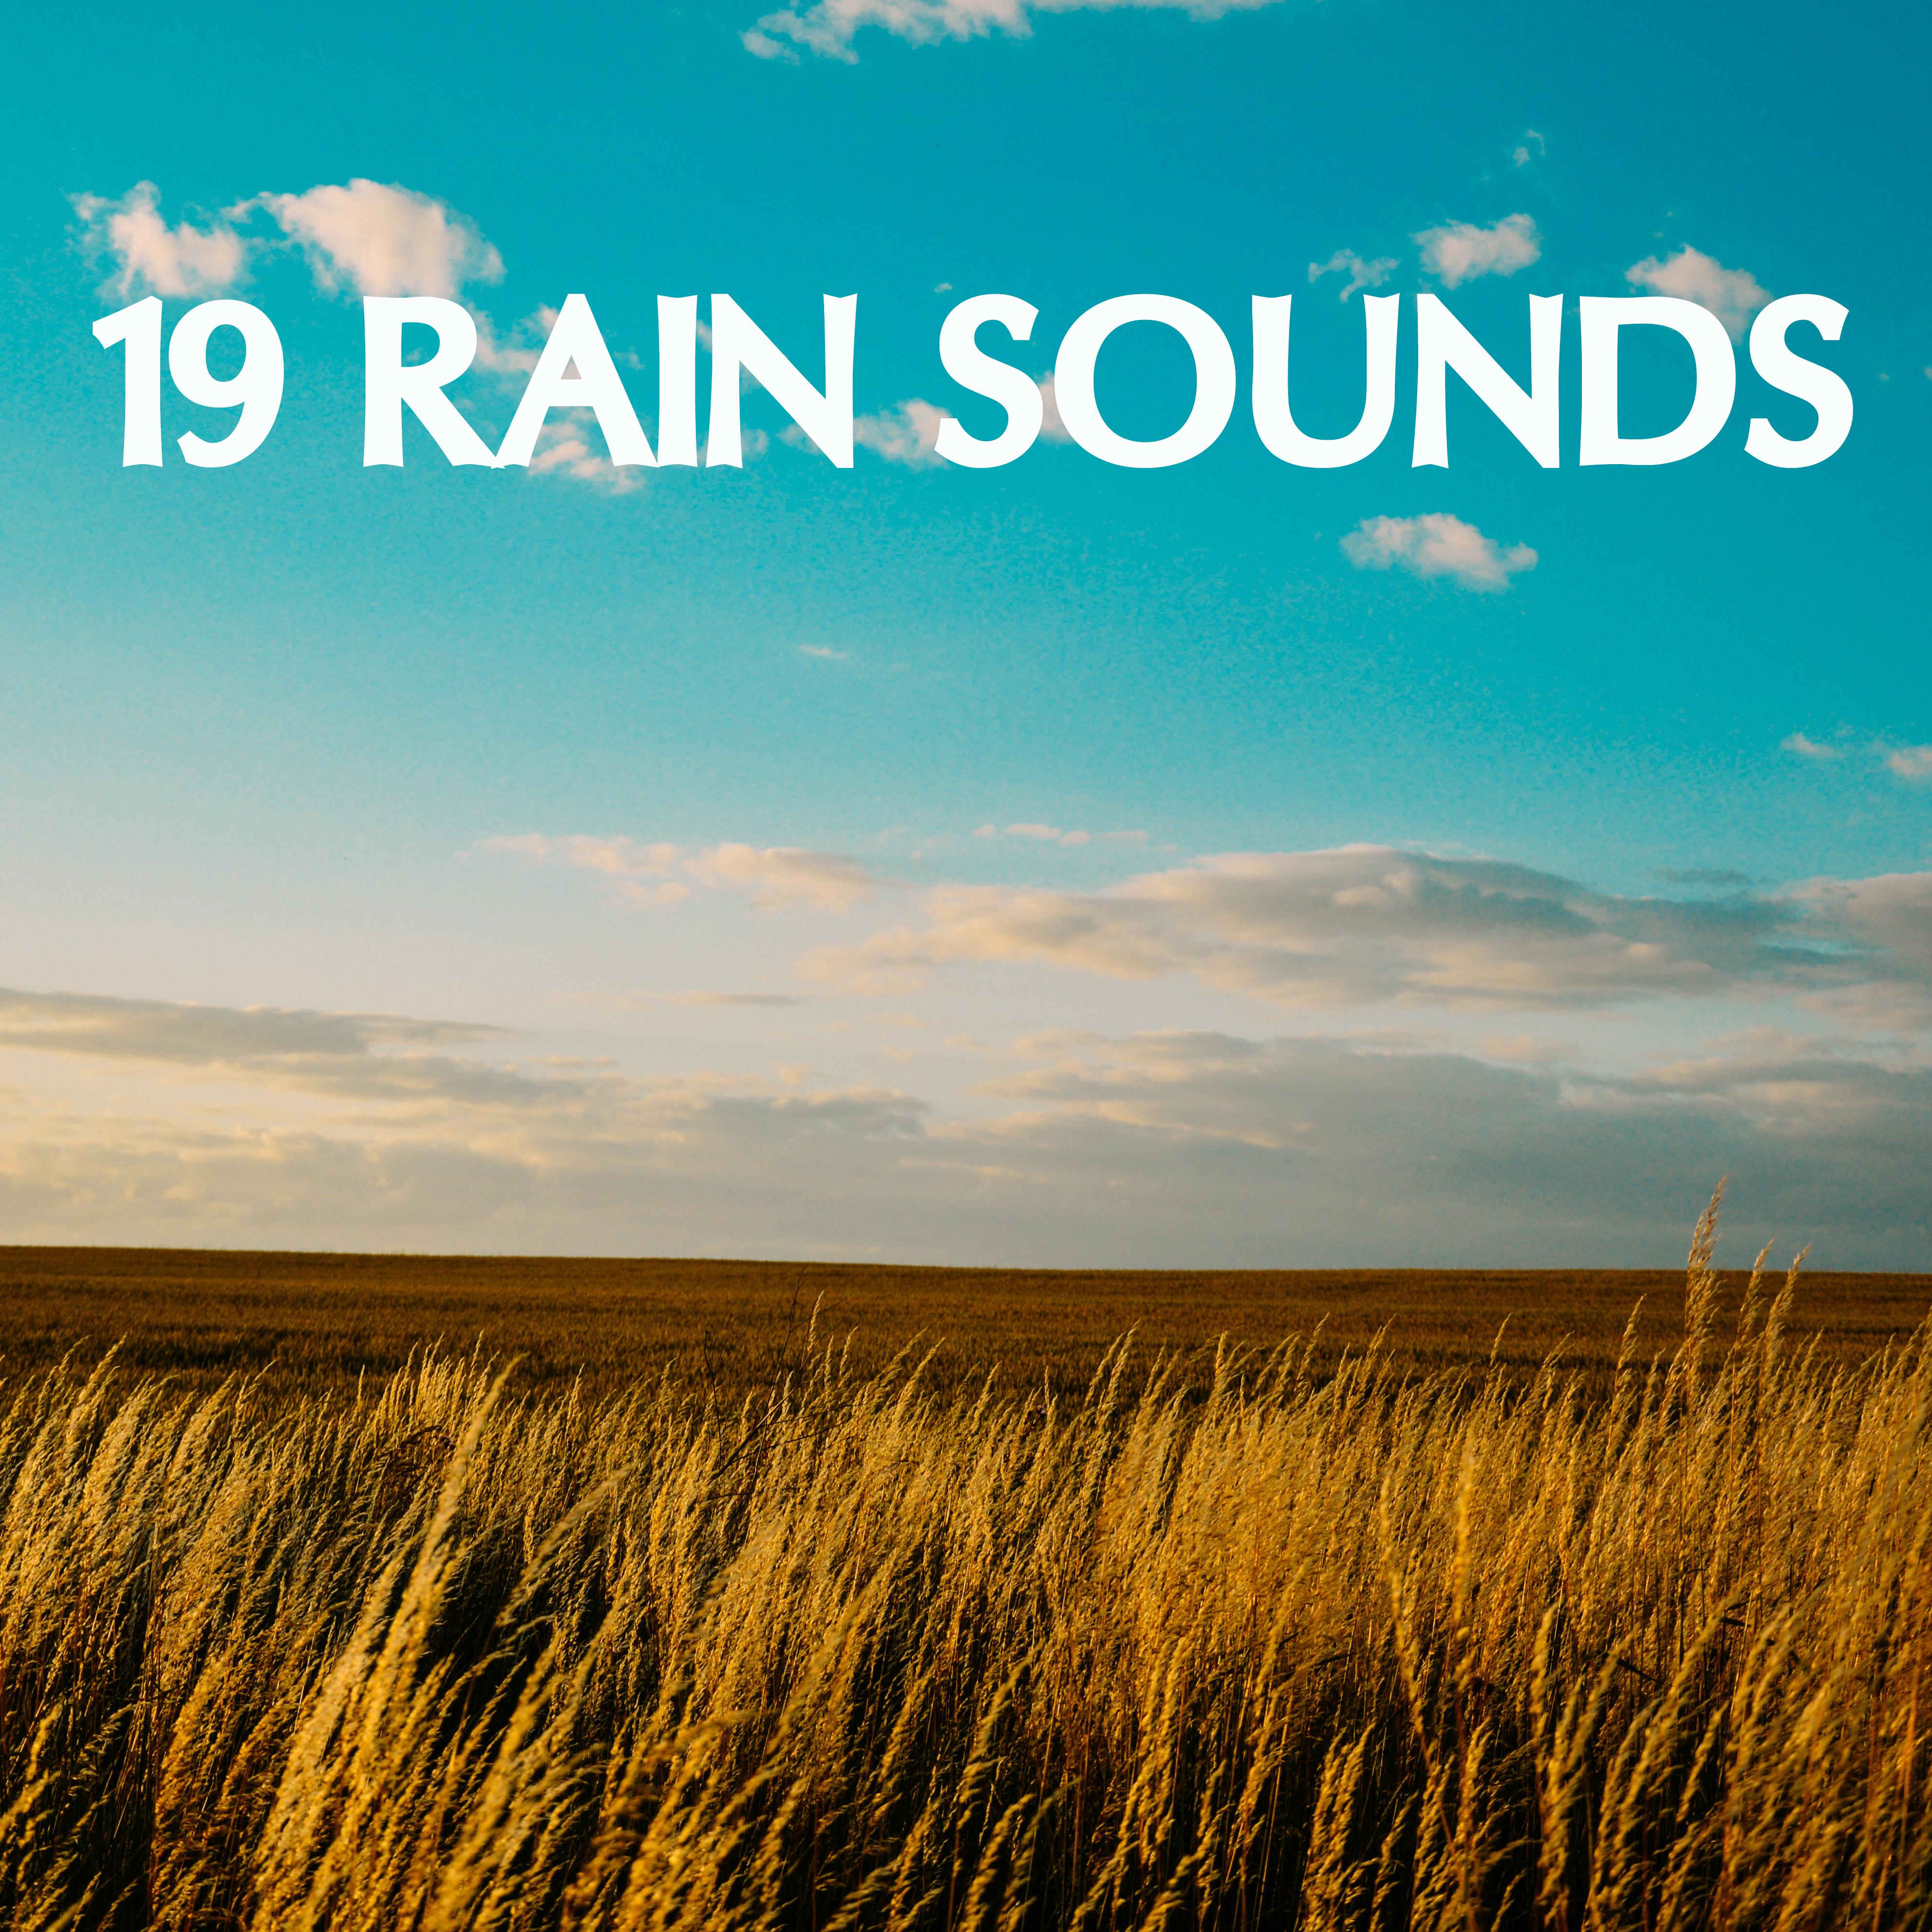 19 Rain Sounds to Induce Deep and Natural Sleep and Relaxation